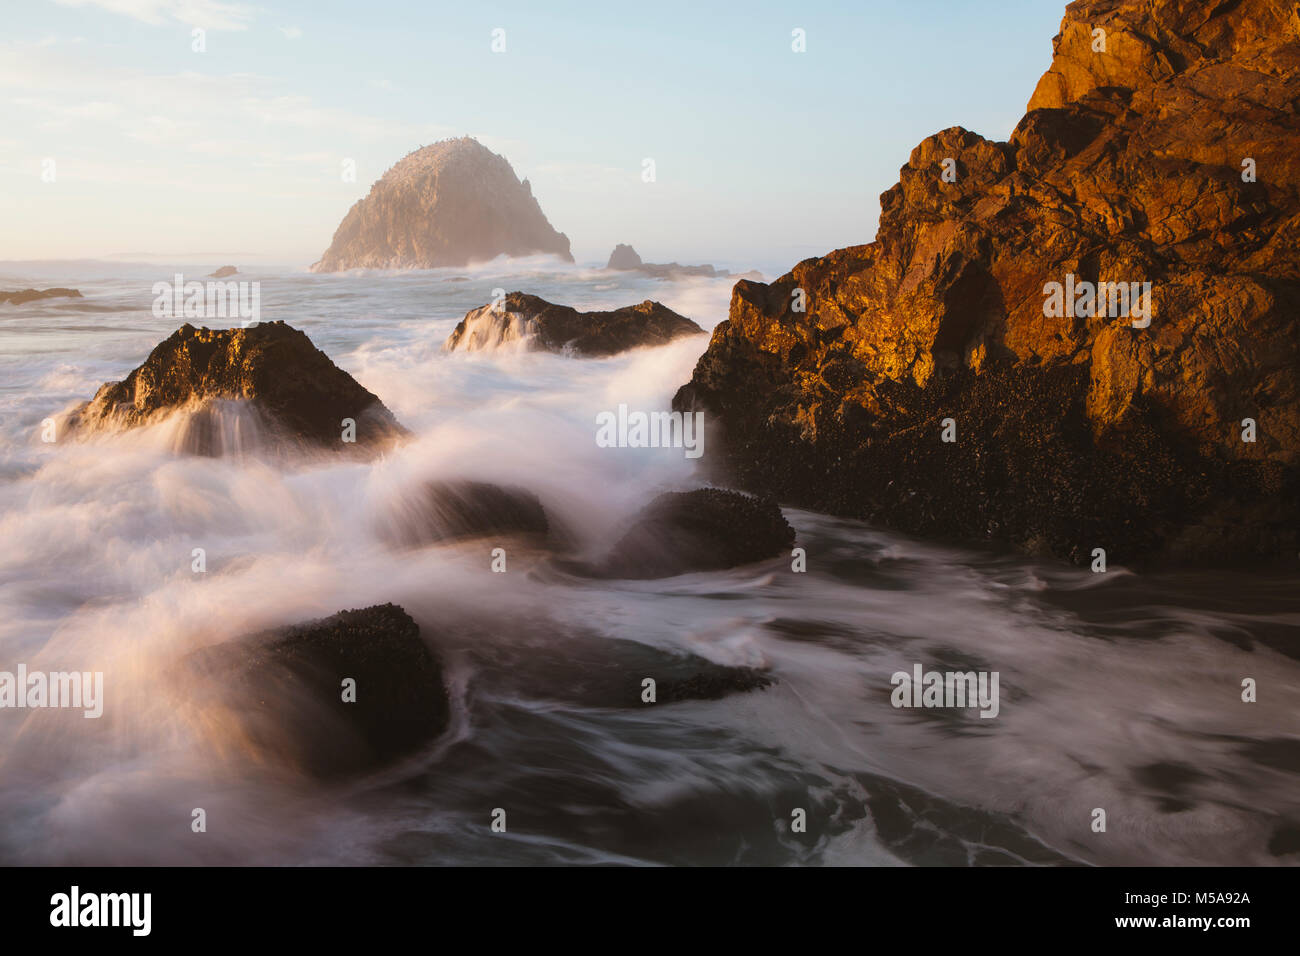 Seascape with breaking waves over rocks at dusk. Stock Photo